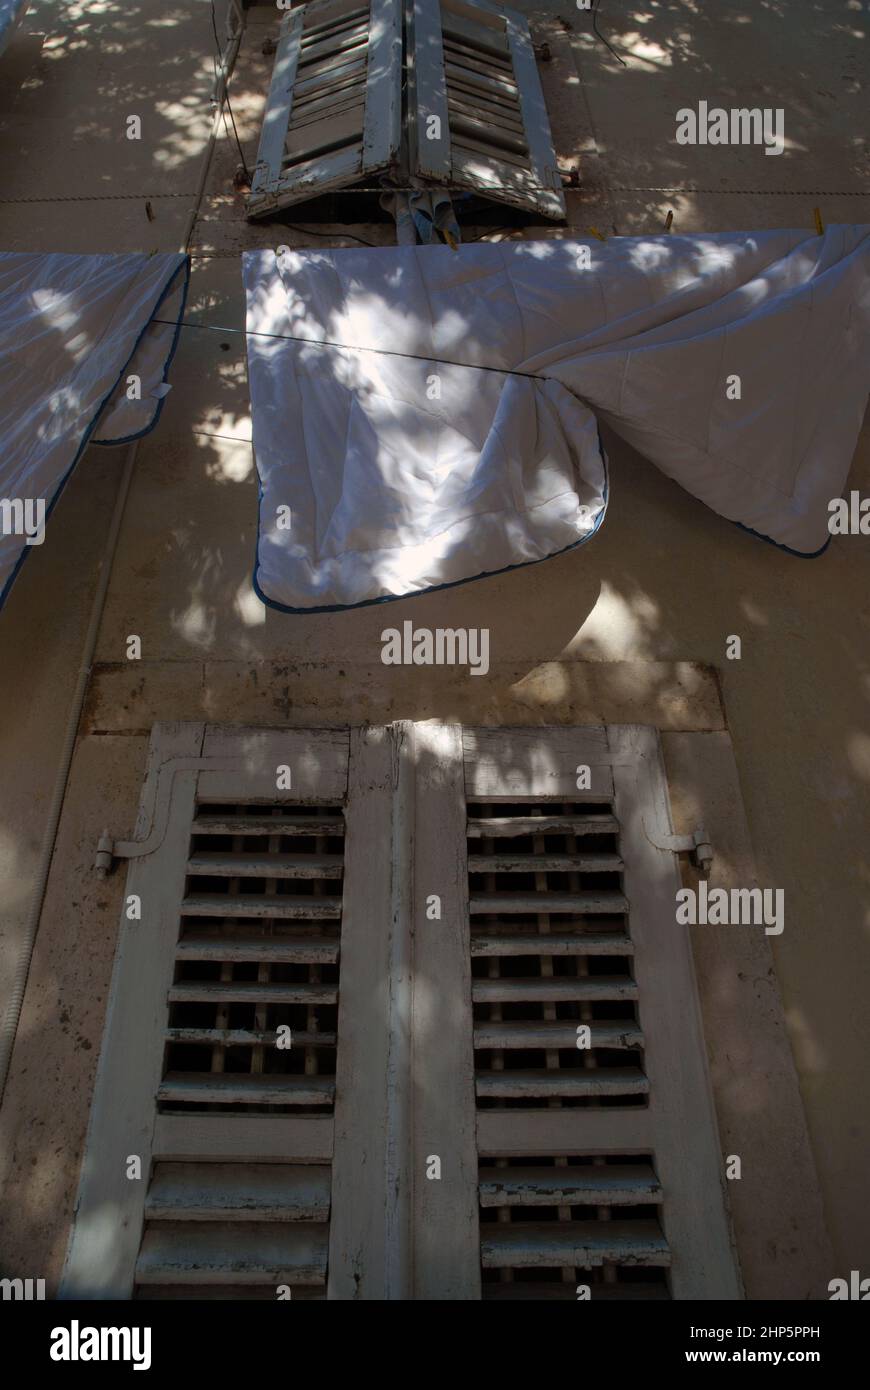 Sheets hanging on washing line from a window, Perast, Montenegro. Stock Photo